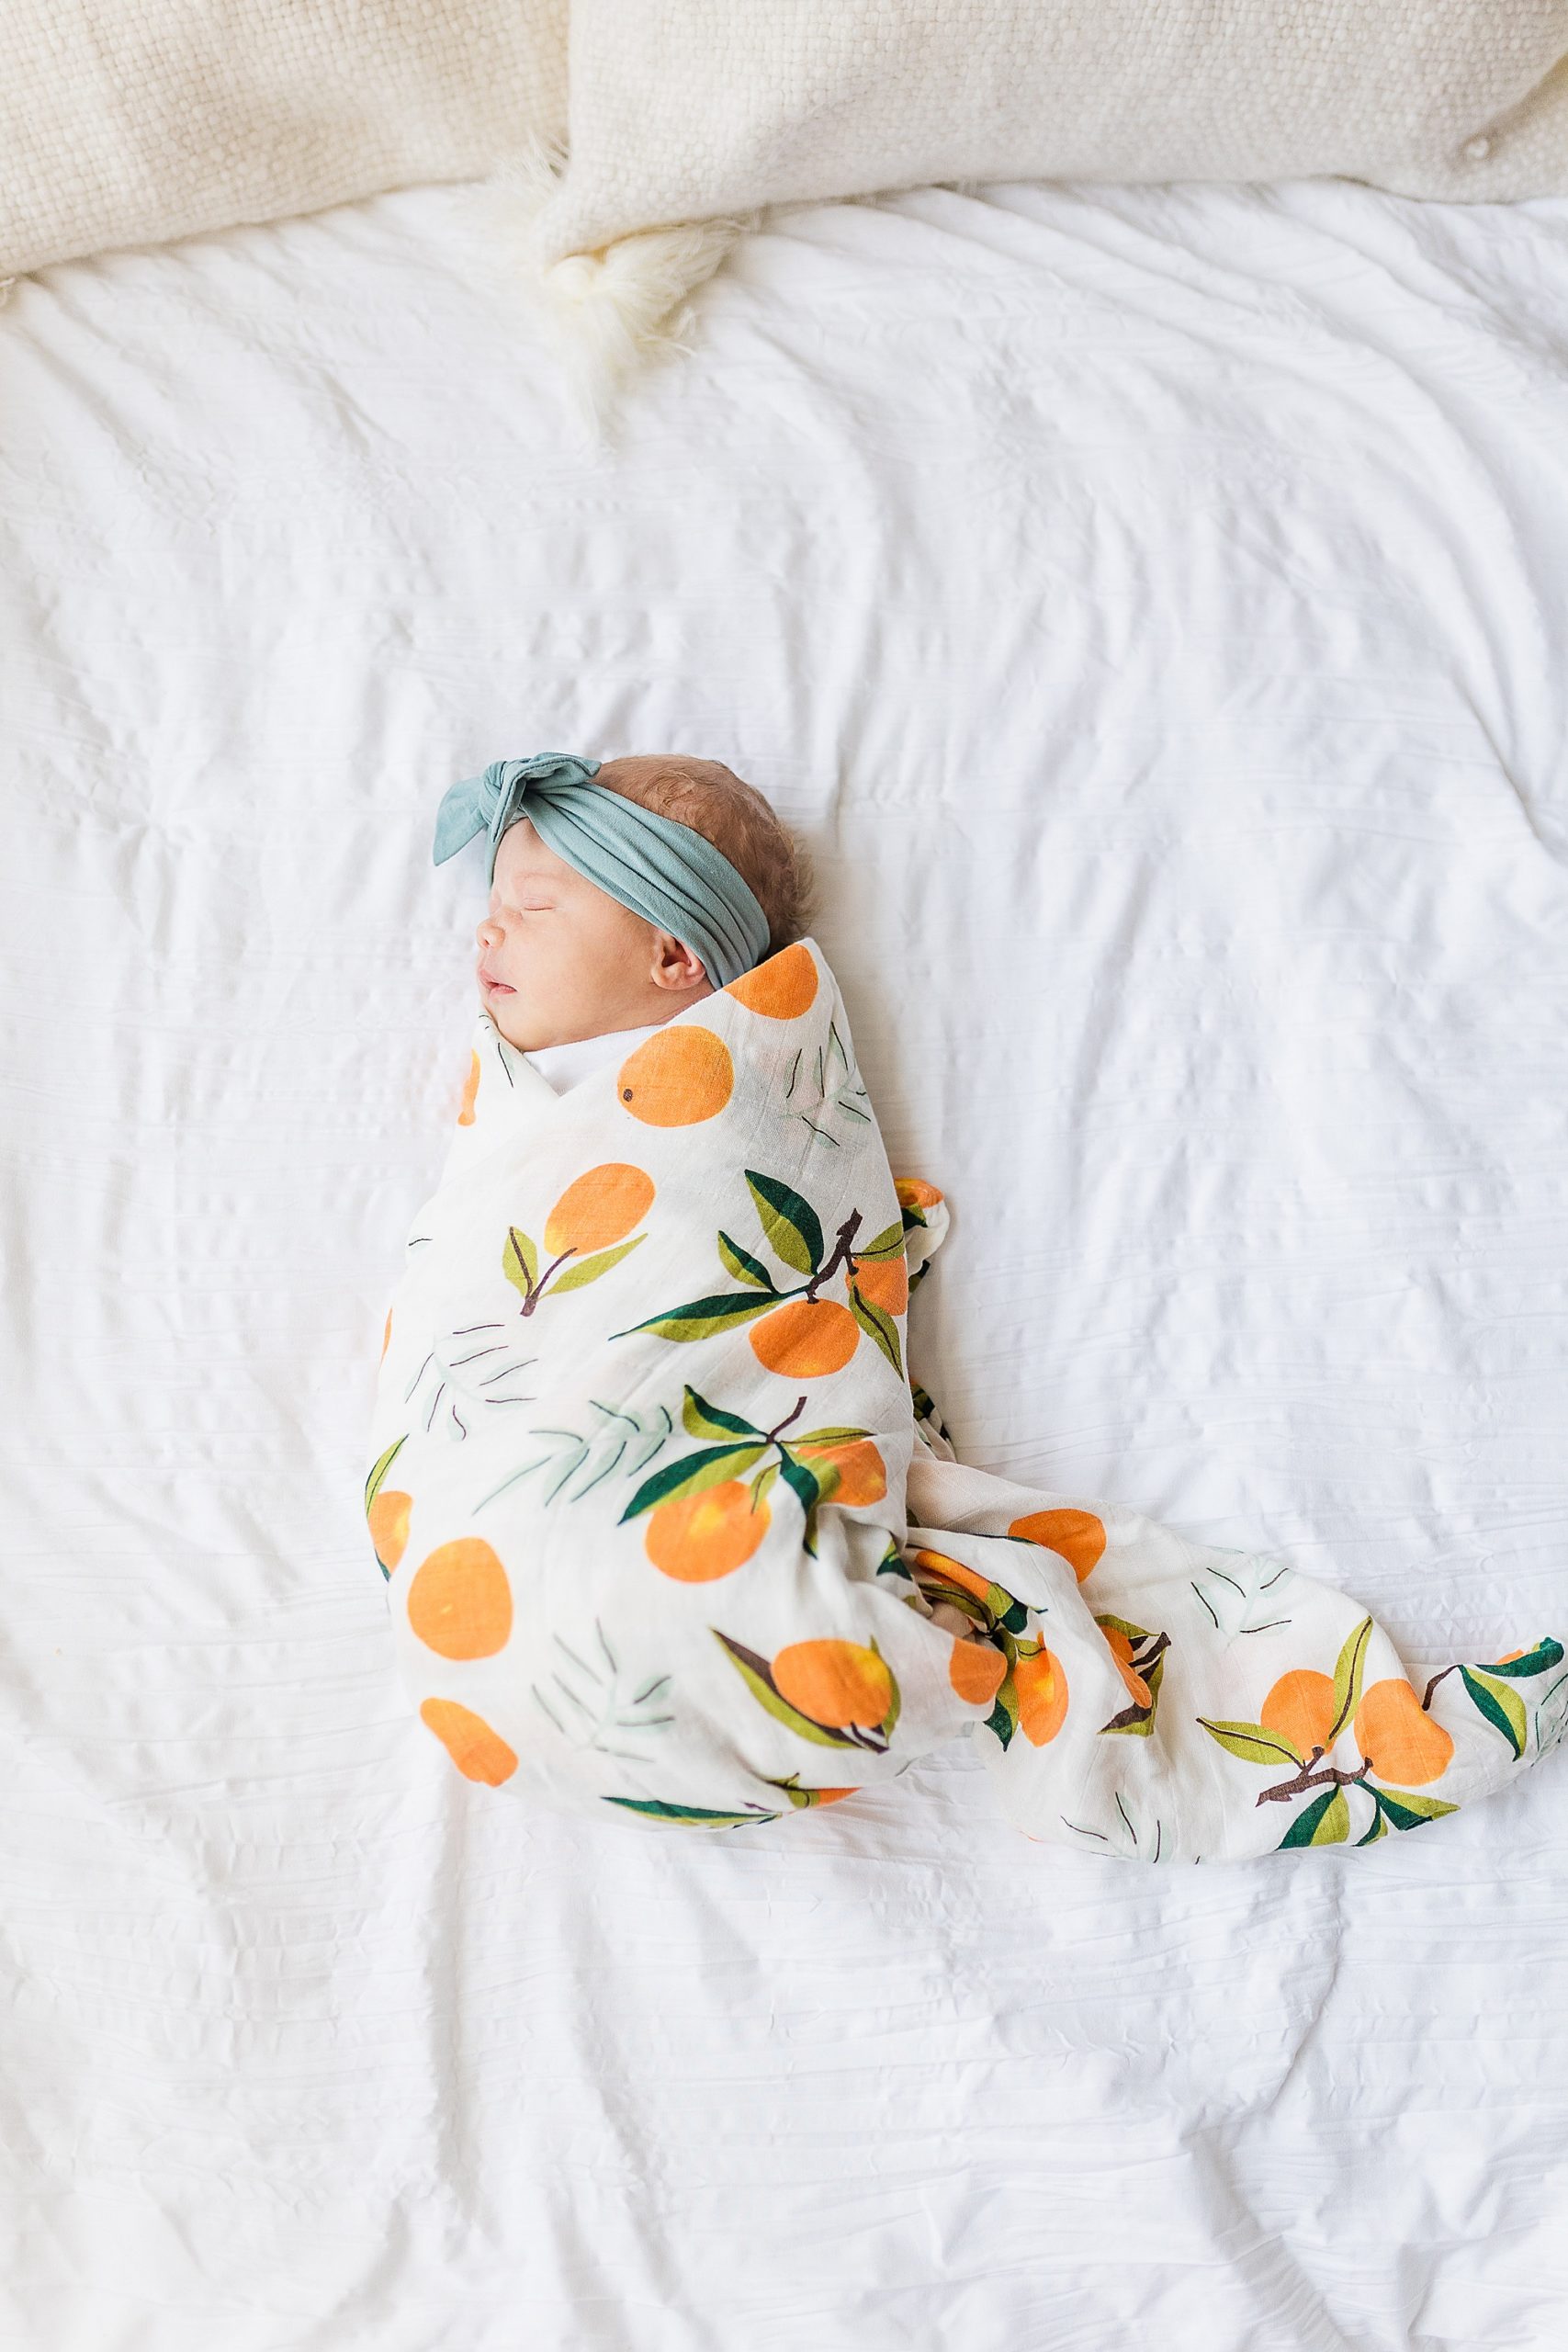 baby girl in citrus wrap lays on bed during newborn photos at home 